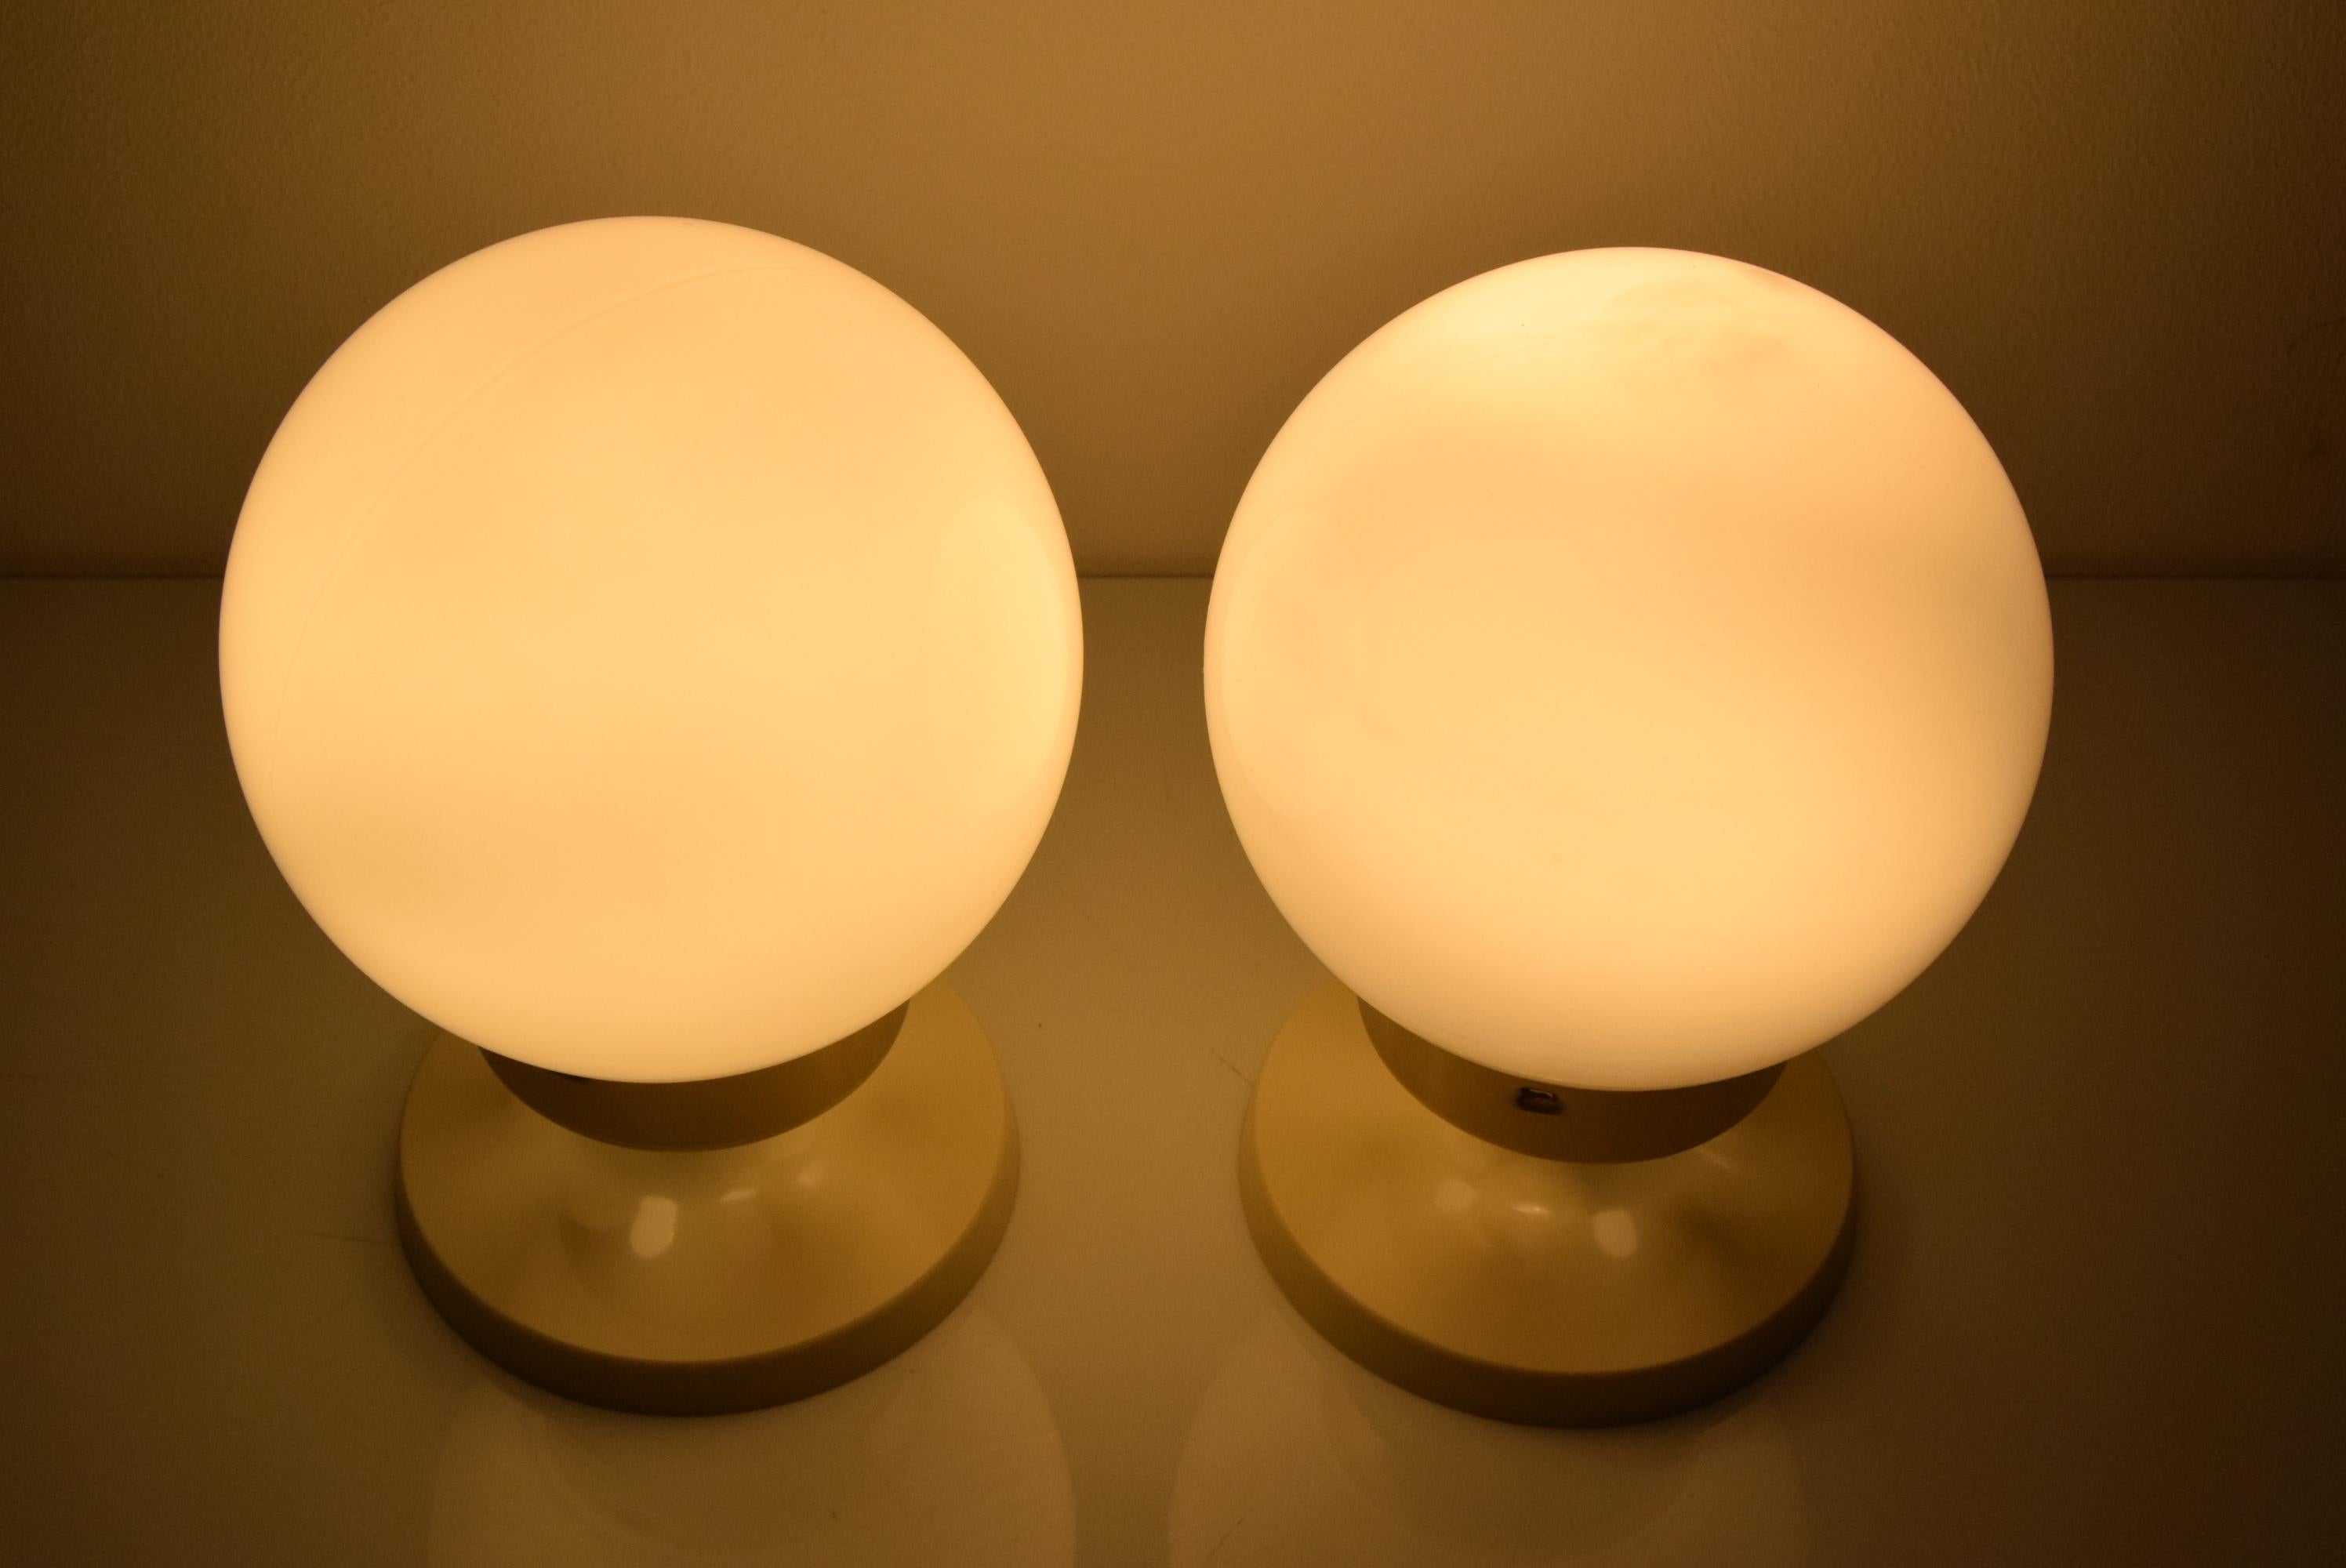 Czech Pair of mid-century Table or Wall Lamps by Instala Děčín, 1970's.  For Sale